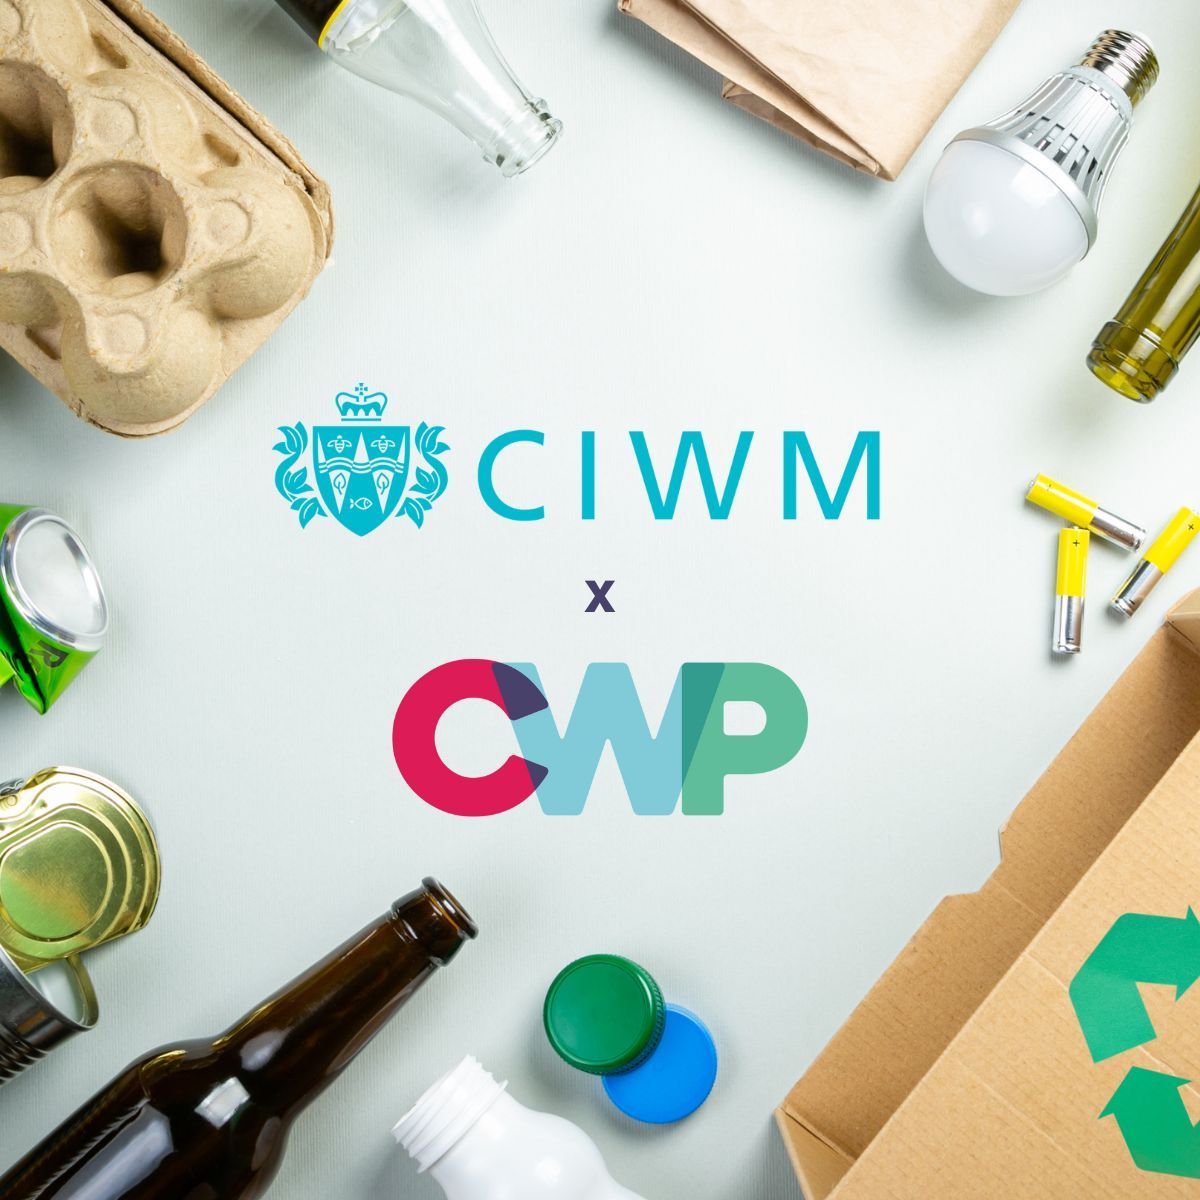 CIWM and Content With Purpose